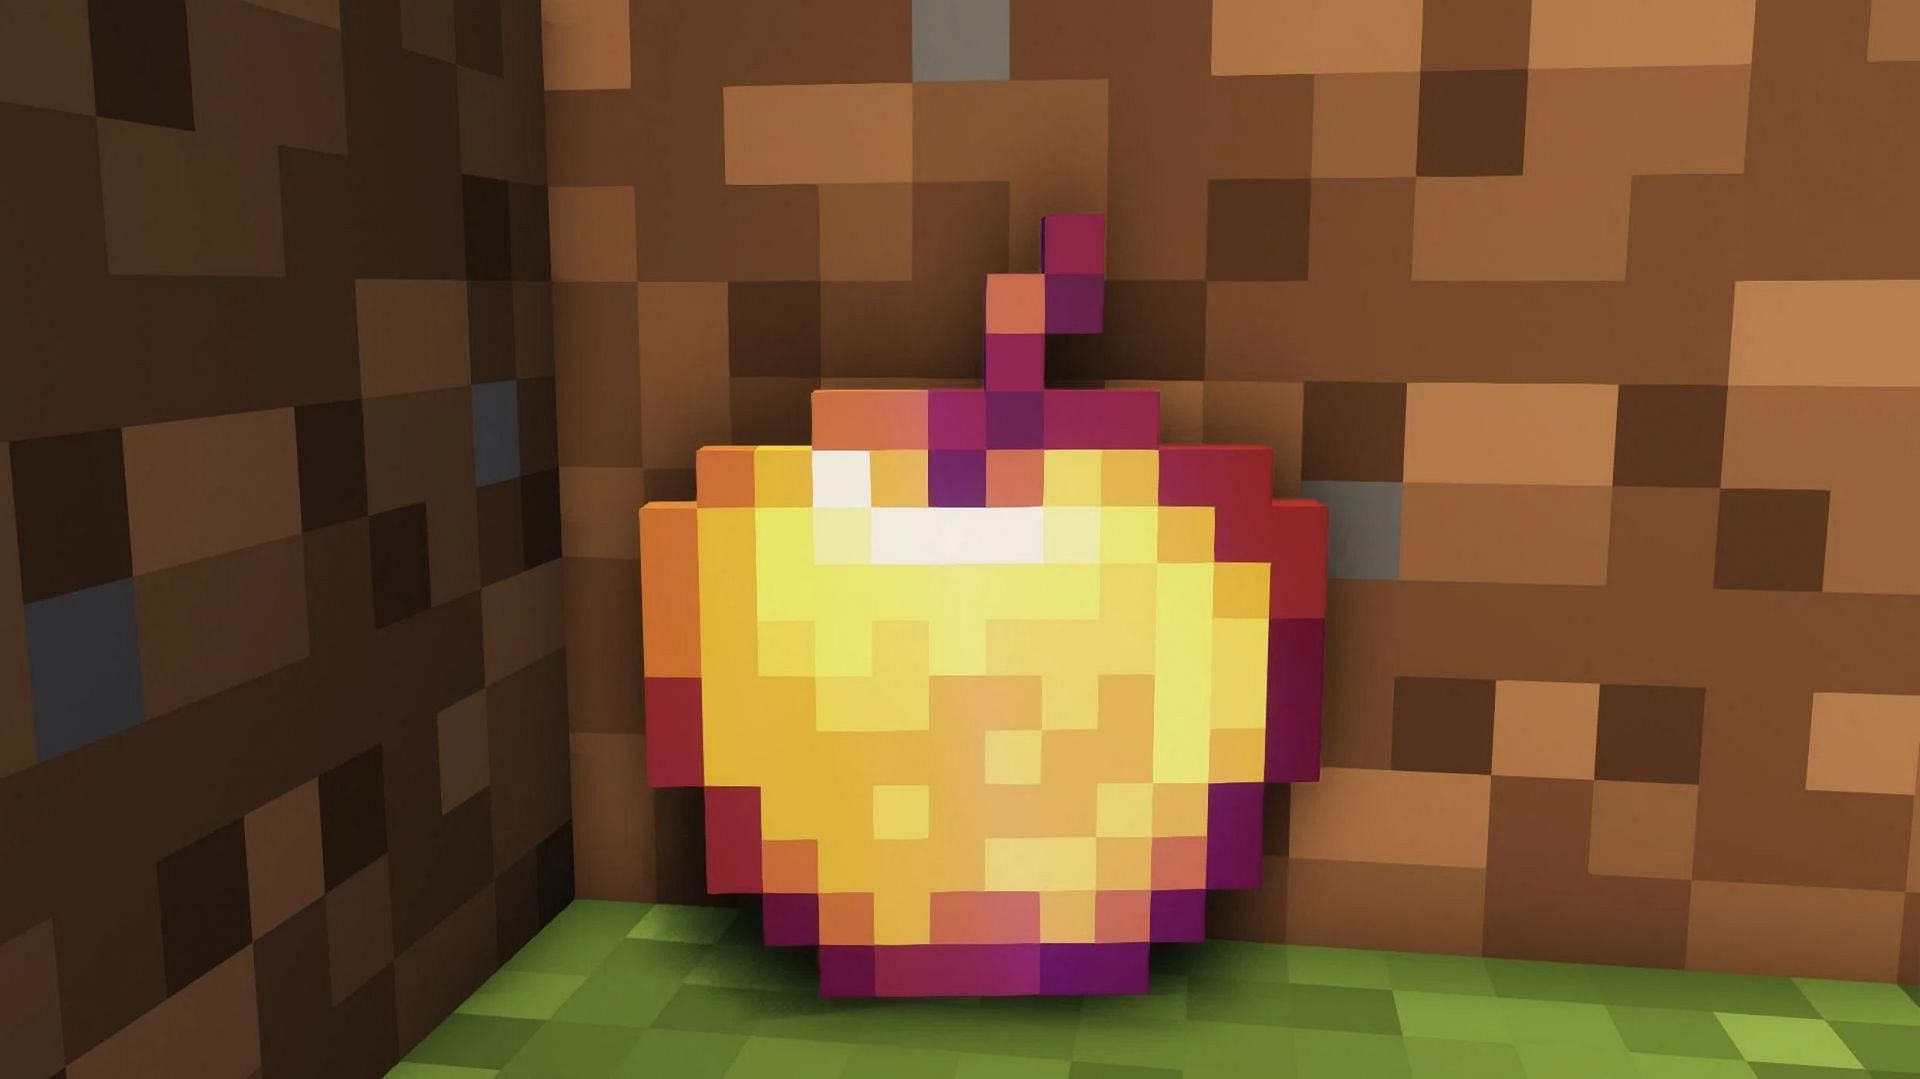 Enchanted golden apples are not craftable in Minecraft (Image via Mojang)